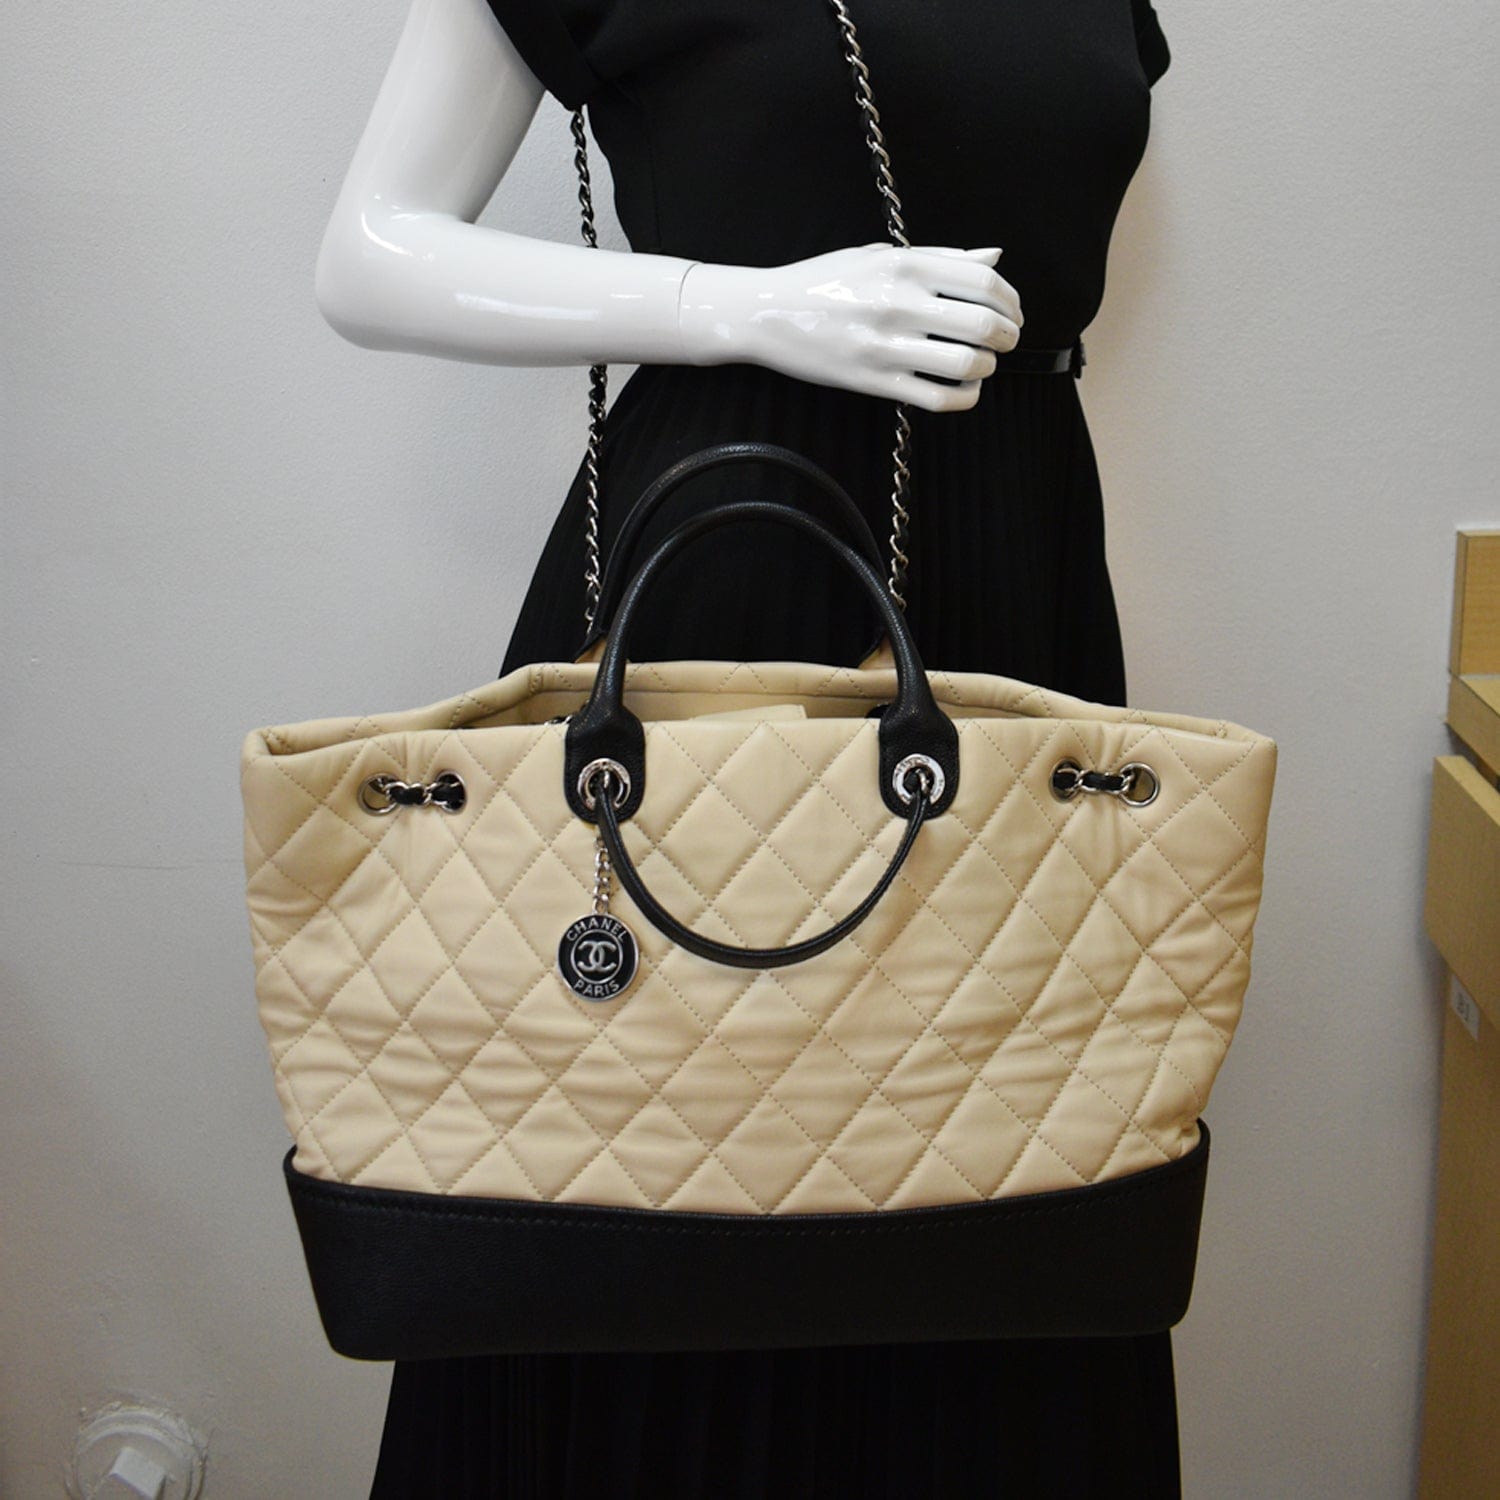 chanel small bag beige tote